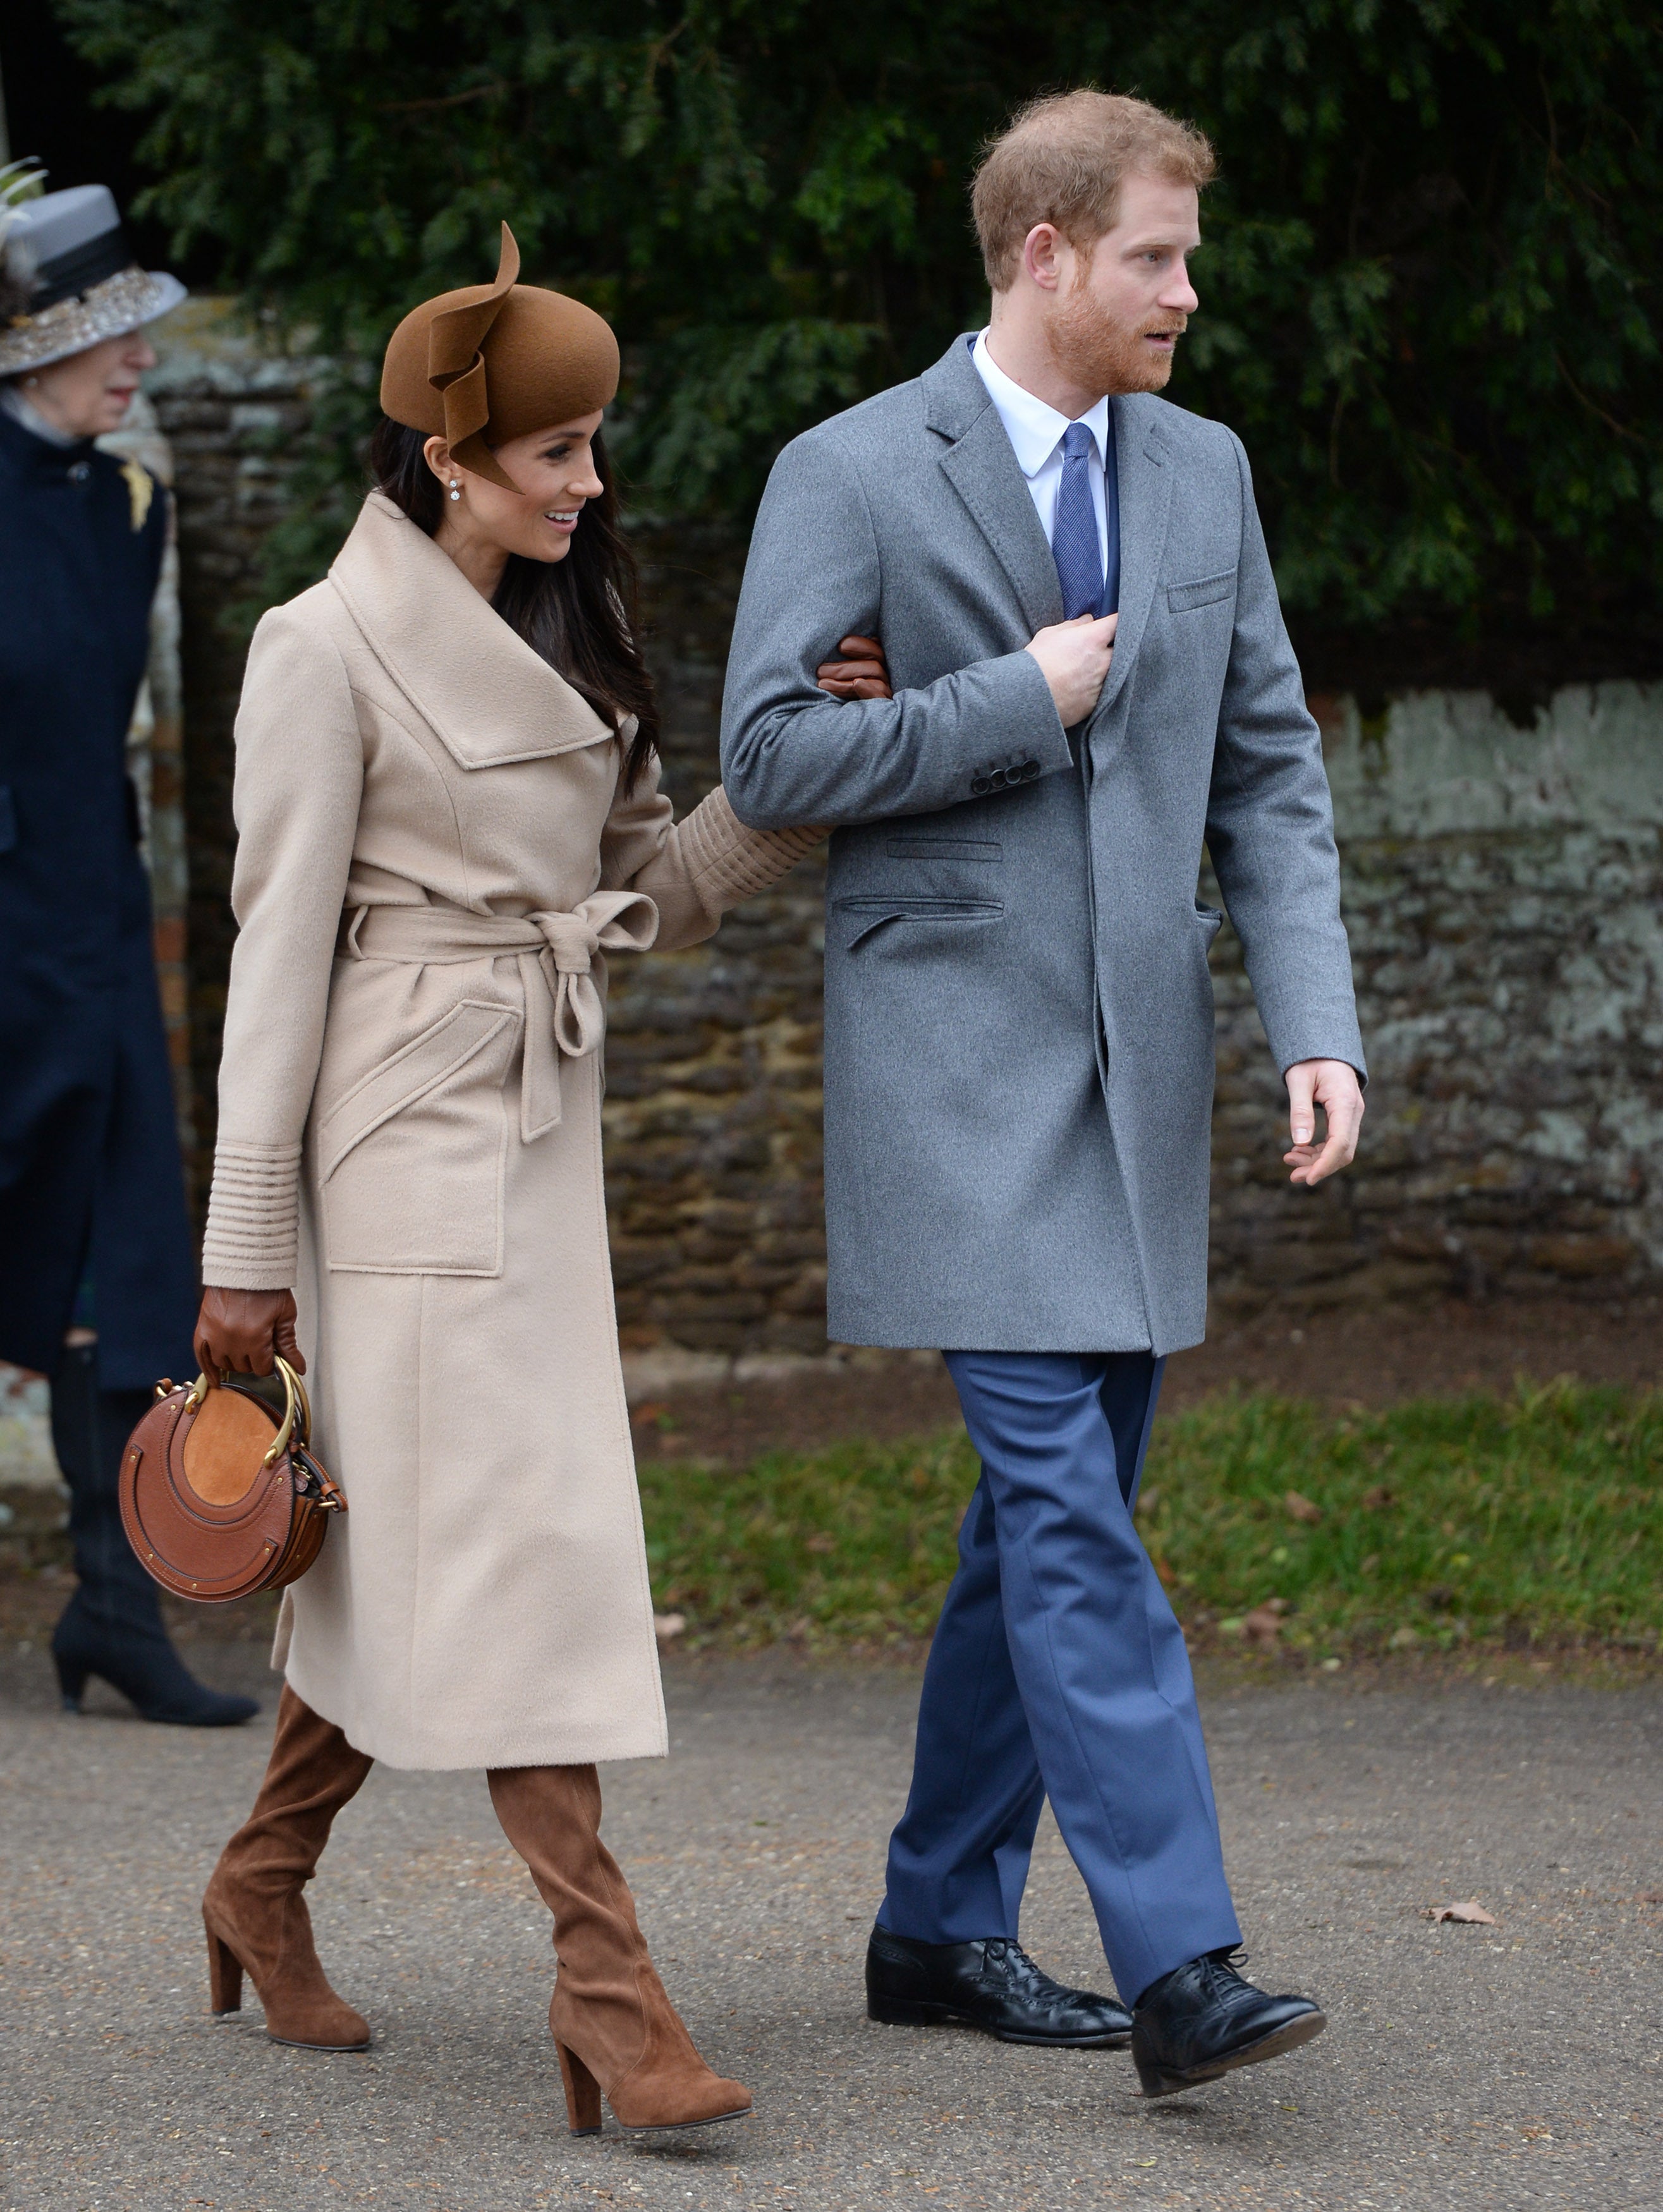 The Duke and Duchess of Sussex leaving the Christmas Day morning church service at St Mary Magdalene Church in Sandringham, photographed in 2017